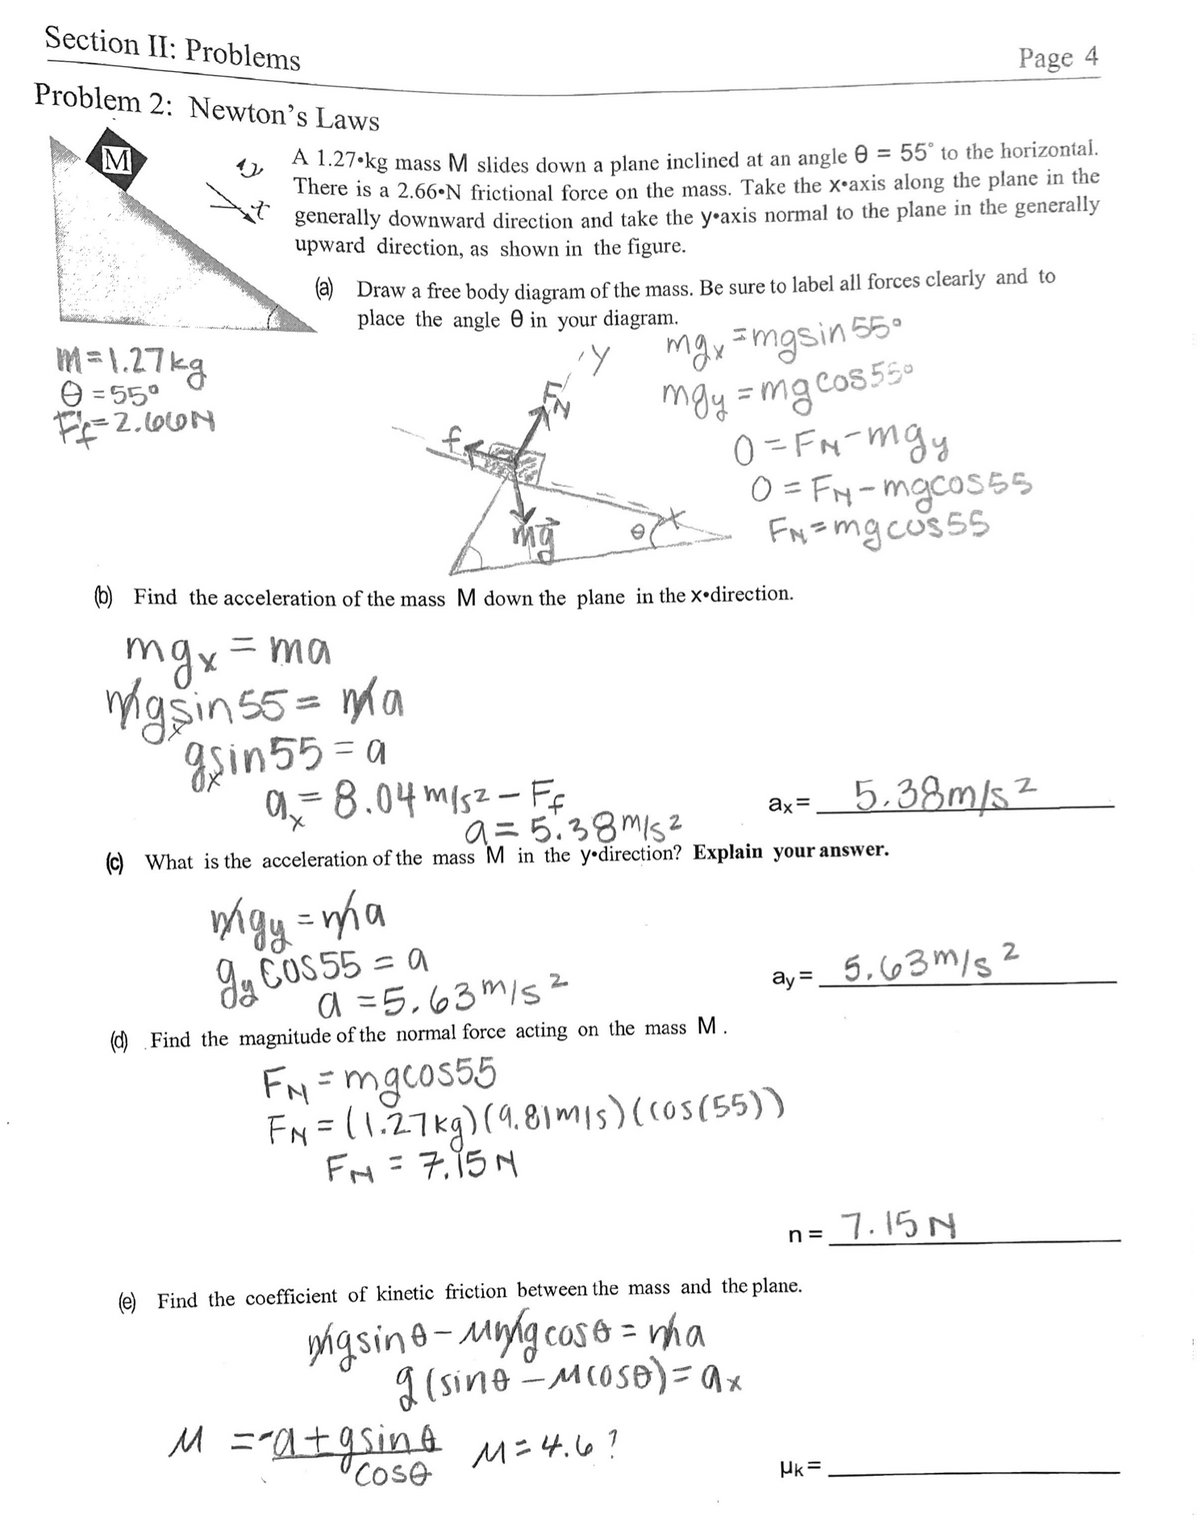 Section II: Problems
Problem 2: Newton's Laws
Page 4
A 1.27•kg mass M slides down a plane inclined at an angle e = 55° to the horizontal.
There is a 2.66•N frictional force on the mass. Take the x•axis along the plane in the
generally downward direction and take the y•axis normal to the plane in the generally
upward direction, as shown in the figure.
%3D
(2) Draw a free body diagram of the mass. Be sure to label all forces clearly and to
place the angle e in your diagram.
mgy =mgsin 55.
moy =mgcos5s.
0 = FN-mgy
O = FM-mgcos55
FN=mg cus55
m= 1.27kg
O = 55°
(b) Find the acceleration of the mass M down the plane in the x•direction.
mgx=ma
igsins5 = ma
gsin55 = a
a-8.04 misz- Ff
%3D
%3D
5.38m/5²
ax=
a= 5.38MIs2
(c) What is the acceleration of the mass M in the y•direction? Explain your answer.
%3D
9u COS55 = a
ay=_ 5,63m/s 2
a =5,63 m/s
O Find the magnitude of the normal force acting on the mass M
ay =
FN=mgcos55
FN = (1.27kg)(9.81mis)(cos(55))
FM=7.15M
7.15 N
n =
(e) Find the coefficient of kinetic friction between the mass and the plane.
yigsine-Mygcose = rha
I (sine -MCOSB)=x
M ="a+9sinA M=4.6?
Cose
Hk =
